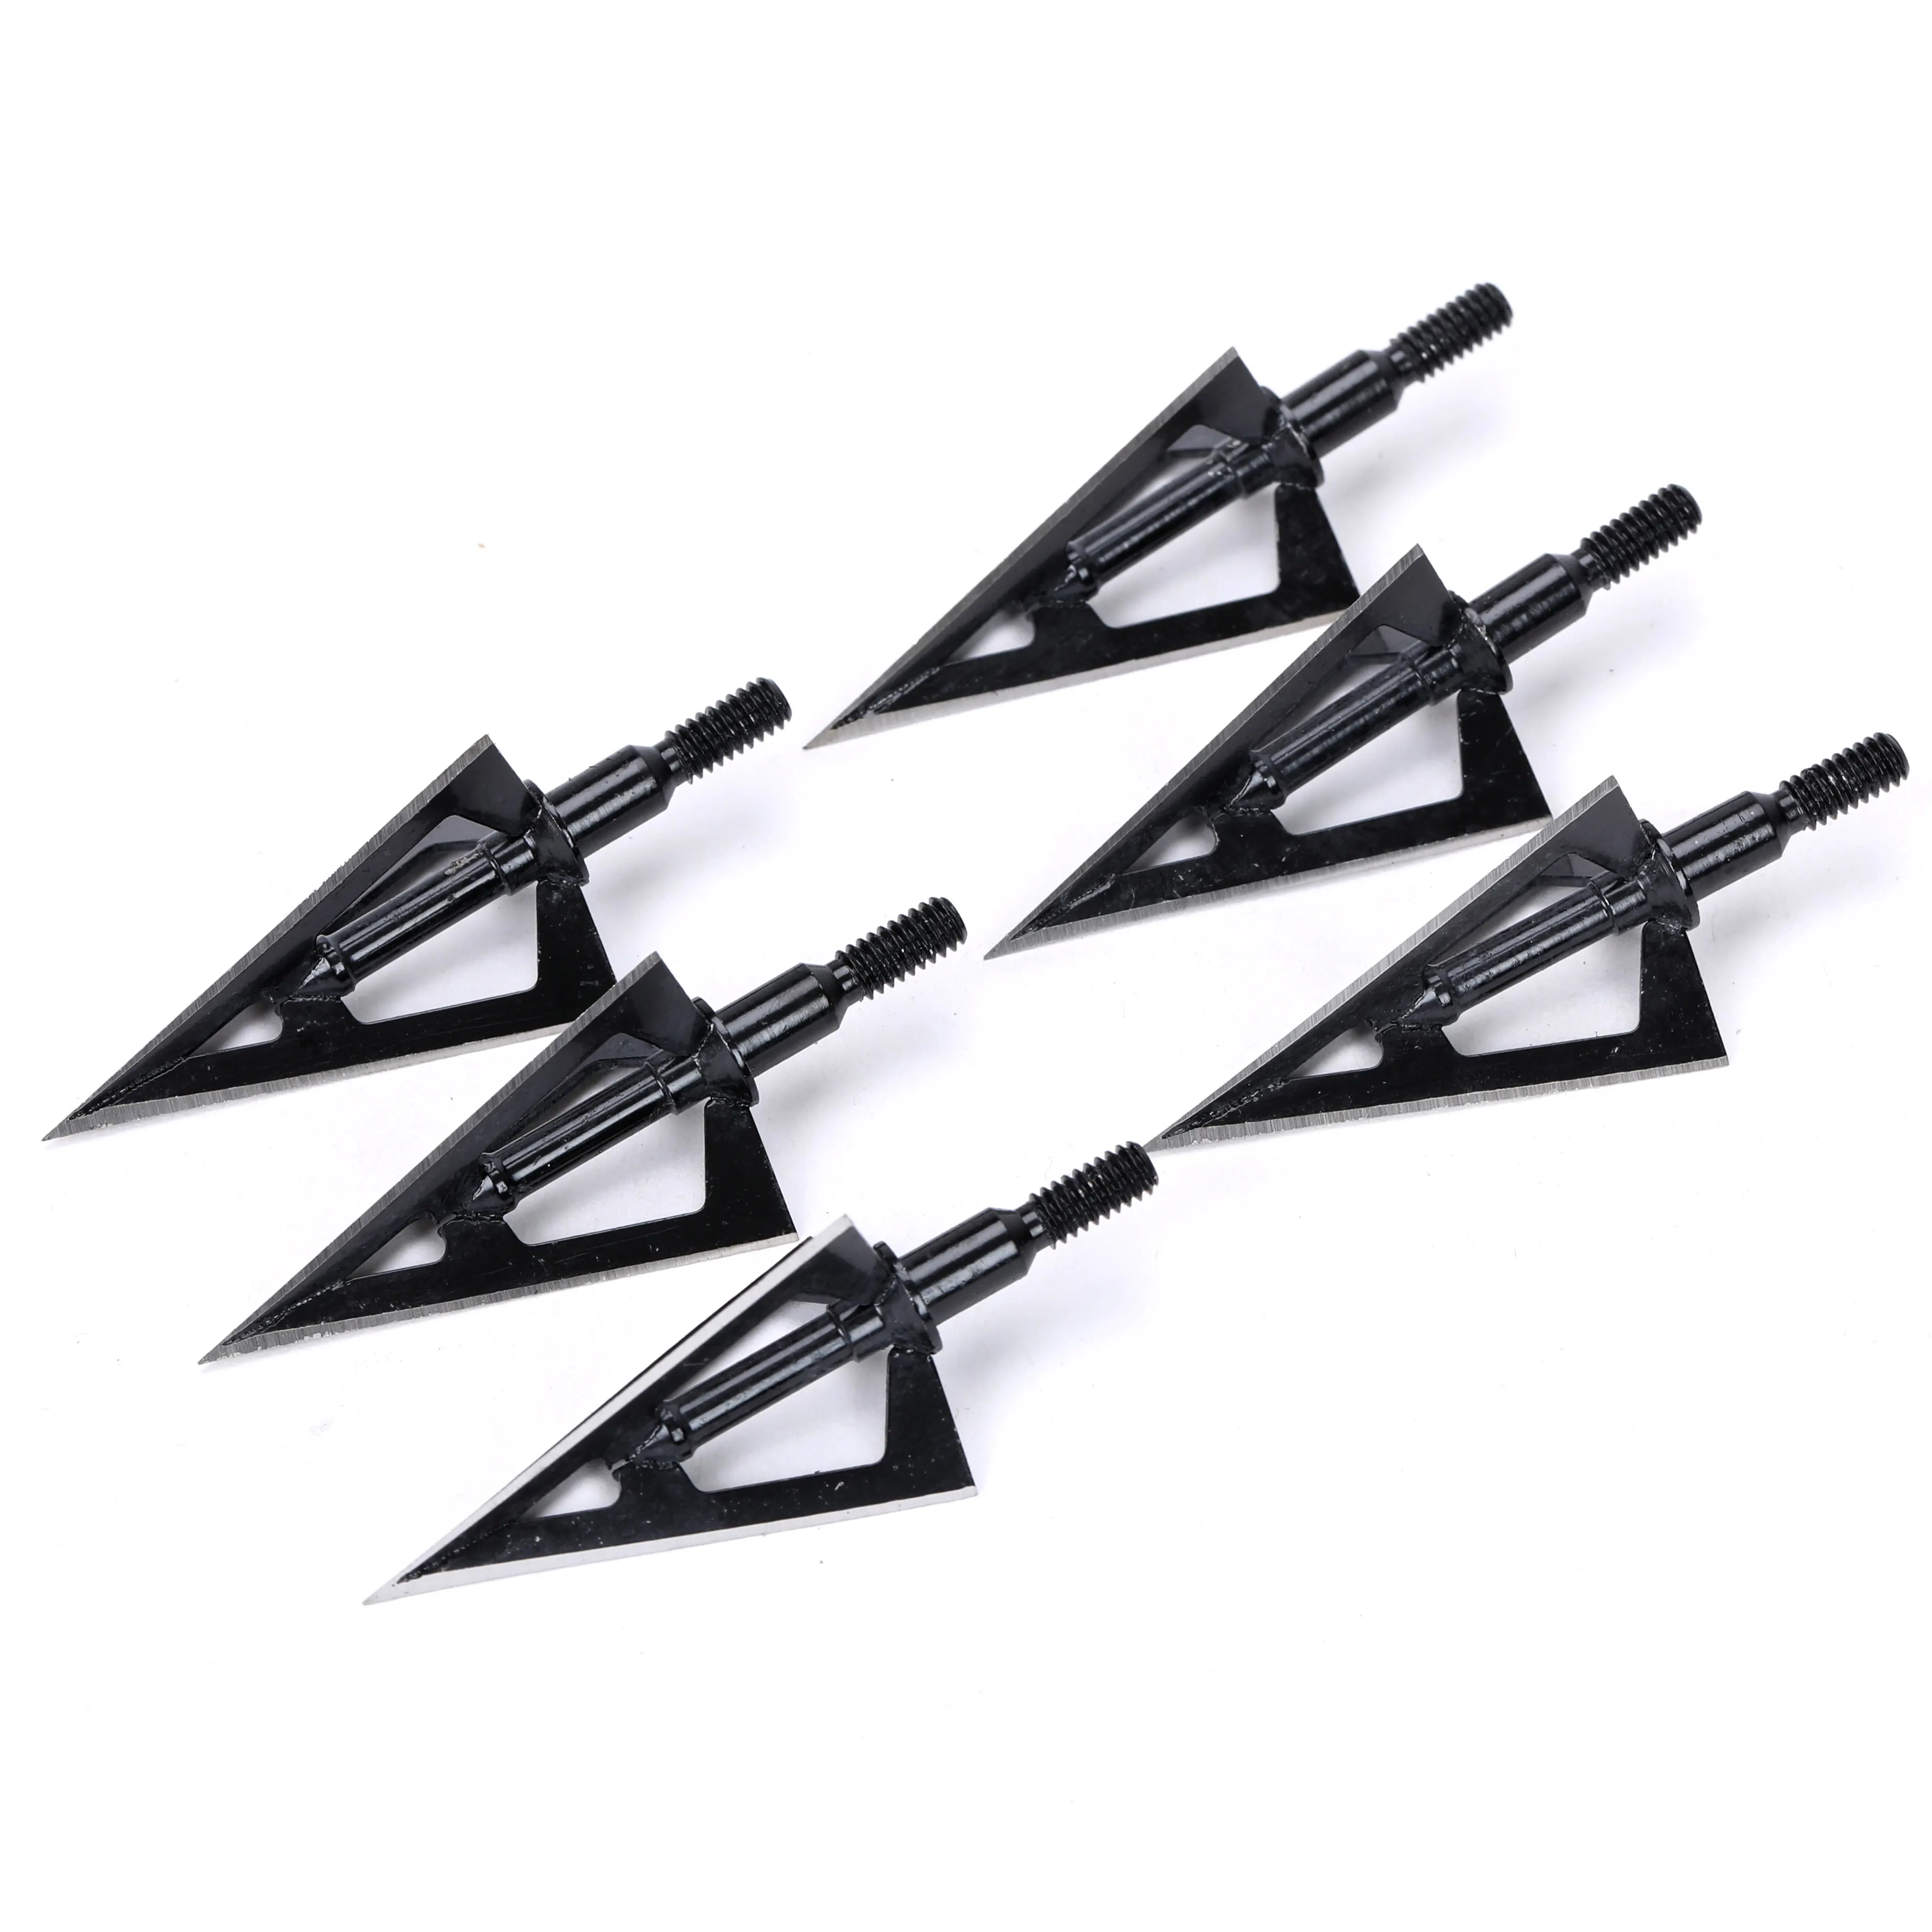 Details about   6PCS Arrowheads for Hunting Arrow Bow 100 Grain Tip Point Telflon Surface 3Blade 